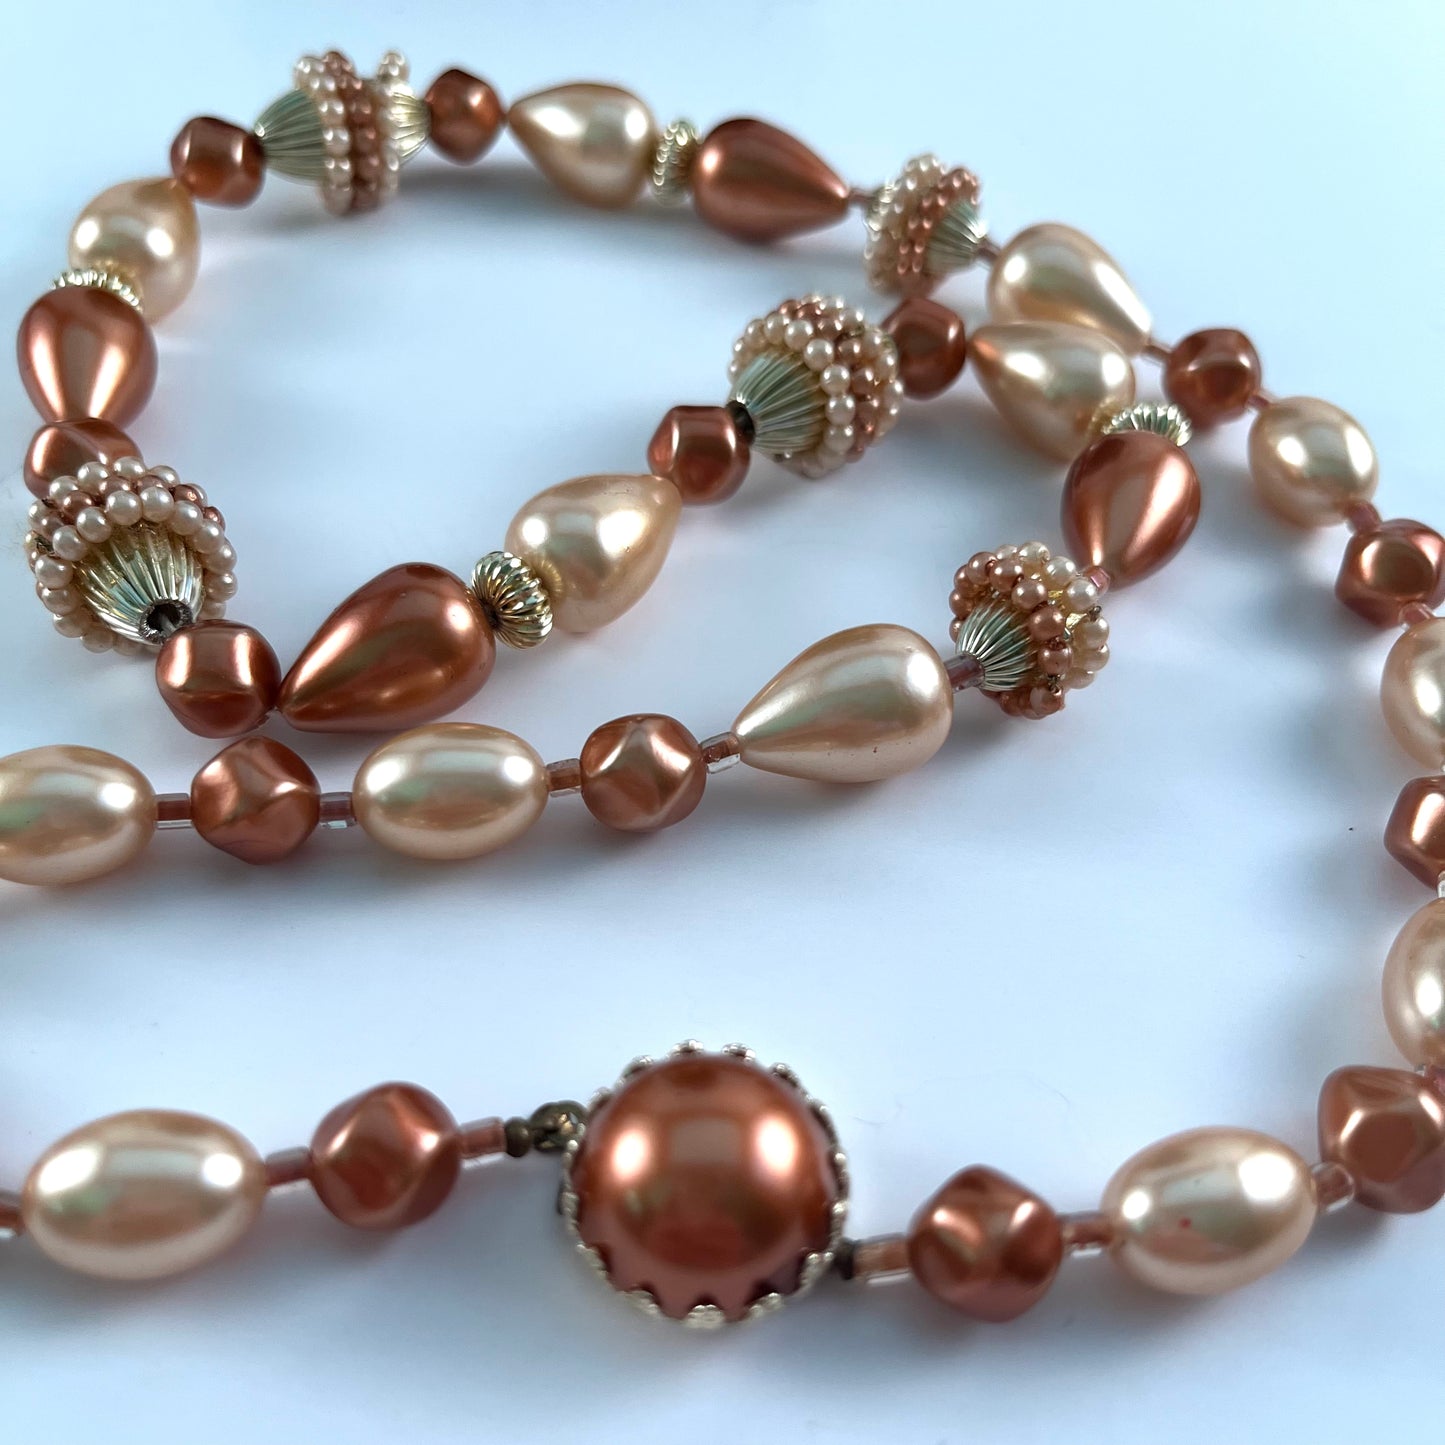 1960s Japan Bead Necklace